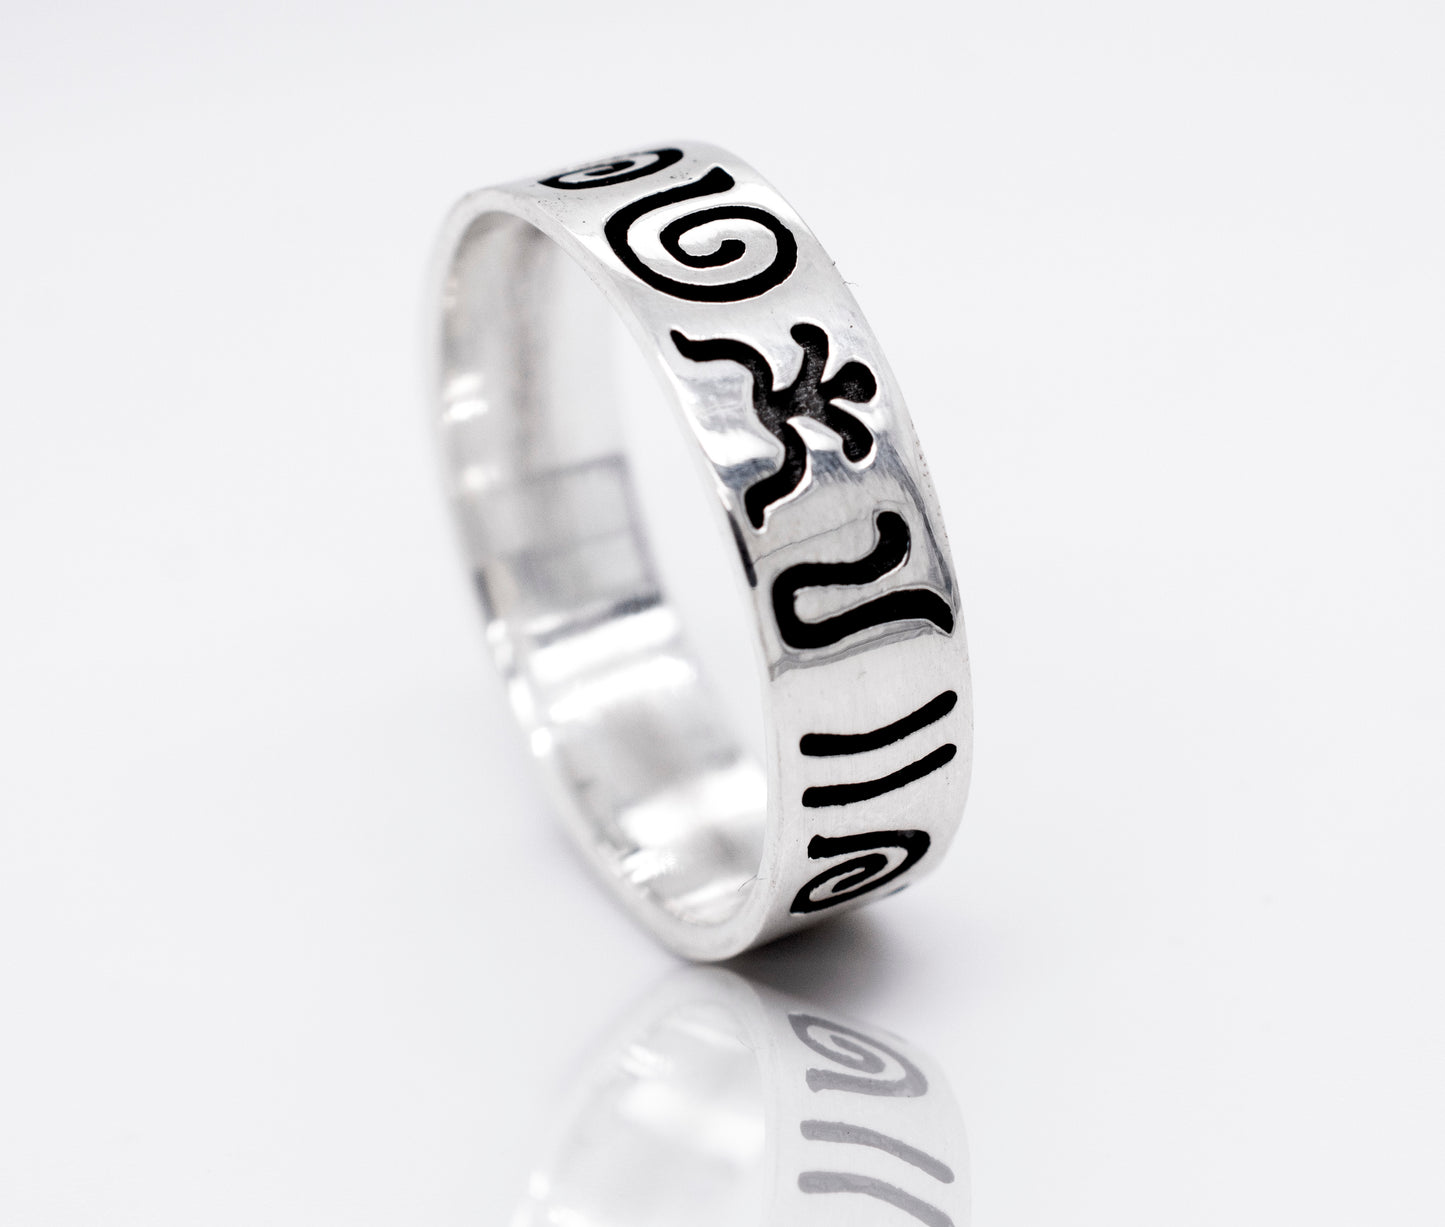 A Super Silver Aztec Symbols Band with a black and white design featuring carved Aztec symbols, giving it an oxidized look.